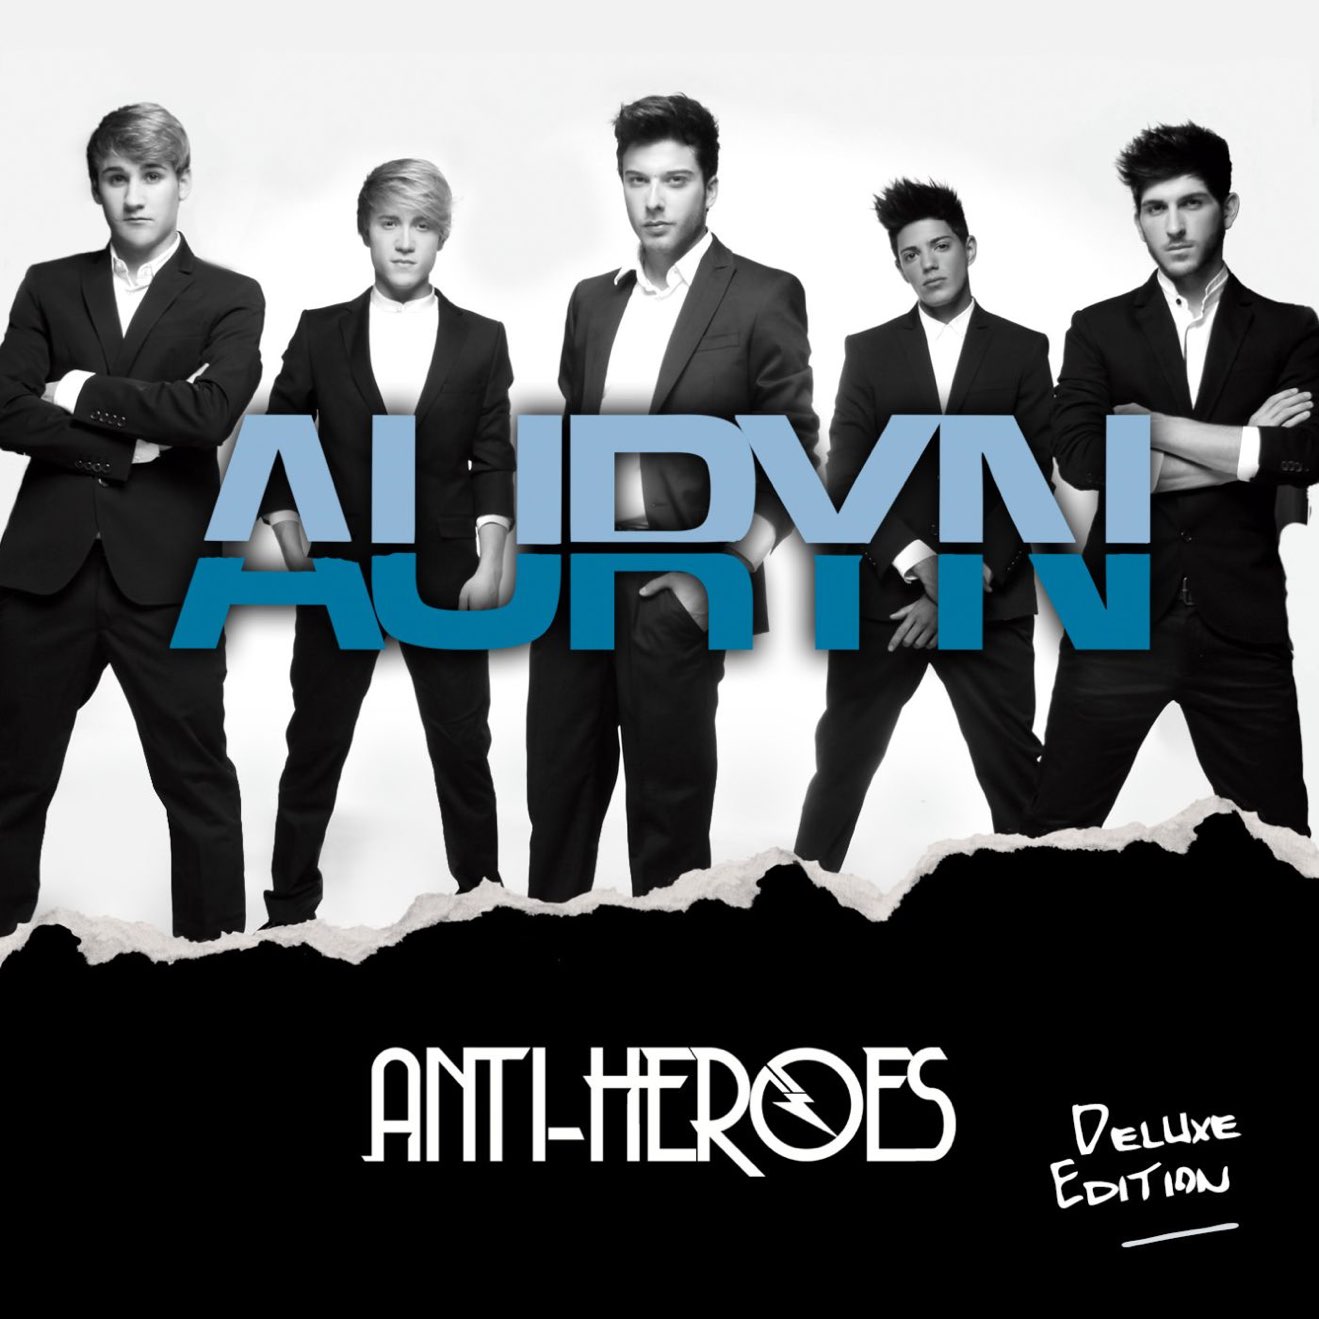 Auryn – Anti-Héroes (Deluxe Edition) (2013) [iTunes Match M4A]